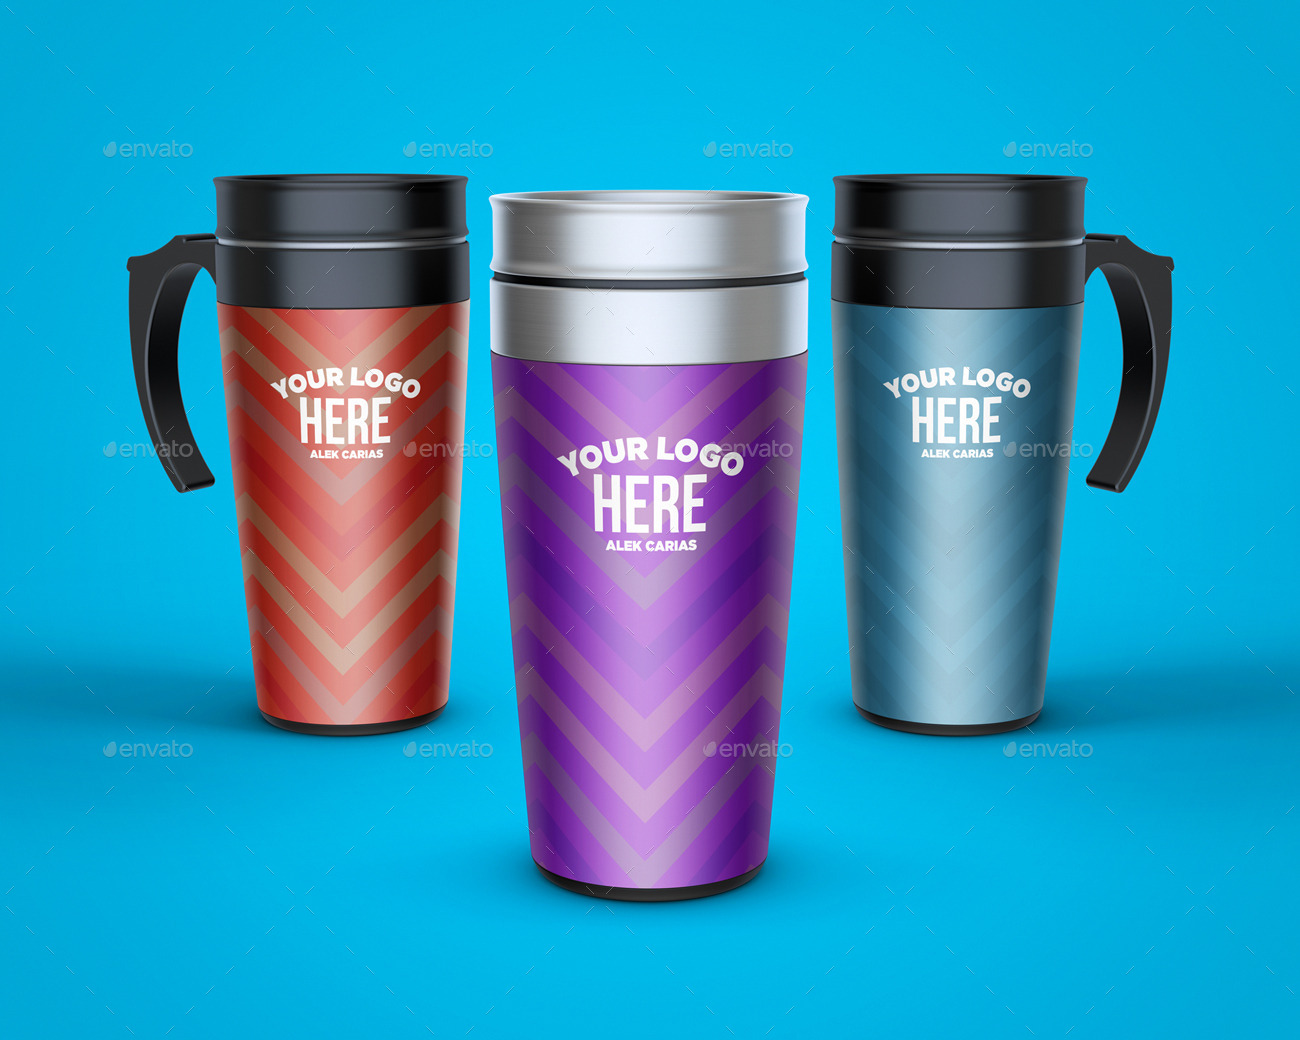 Download 55+ Free Awesome and Professional PSD Cup/ Mug Mockups for designers and Premium version! | Free ...